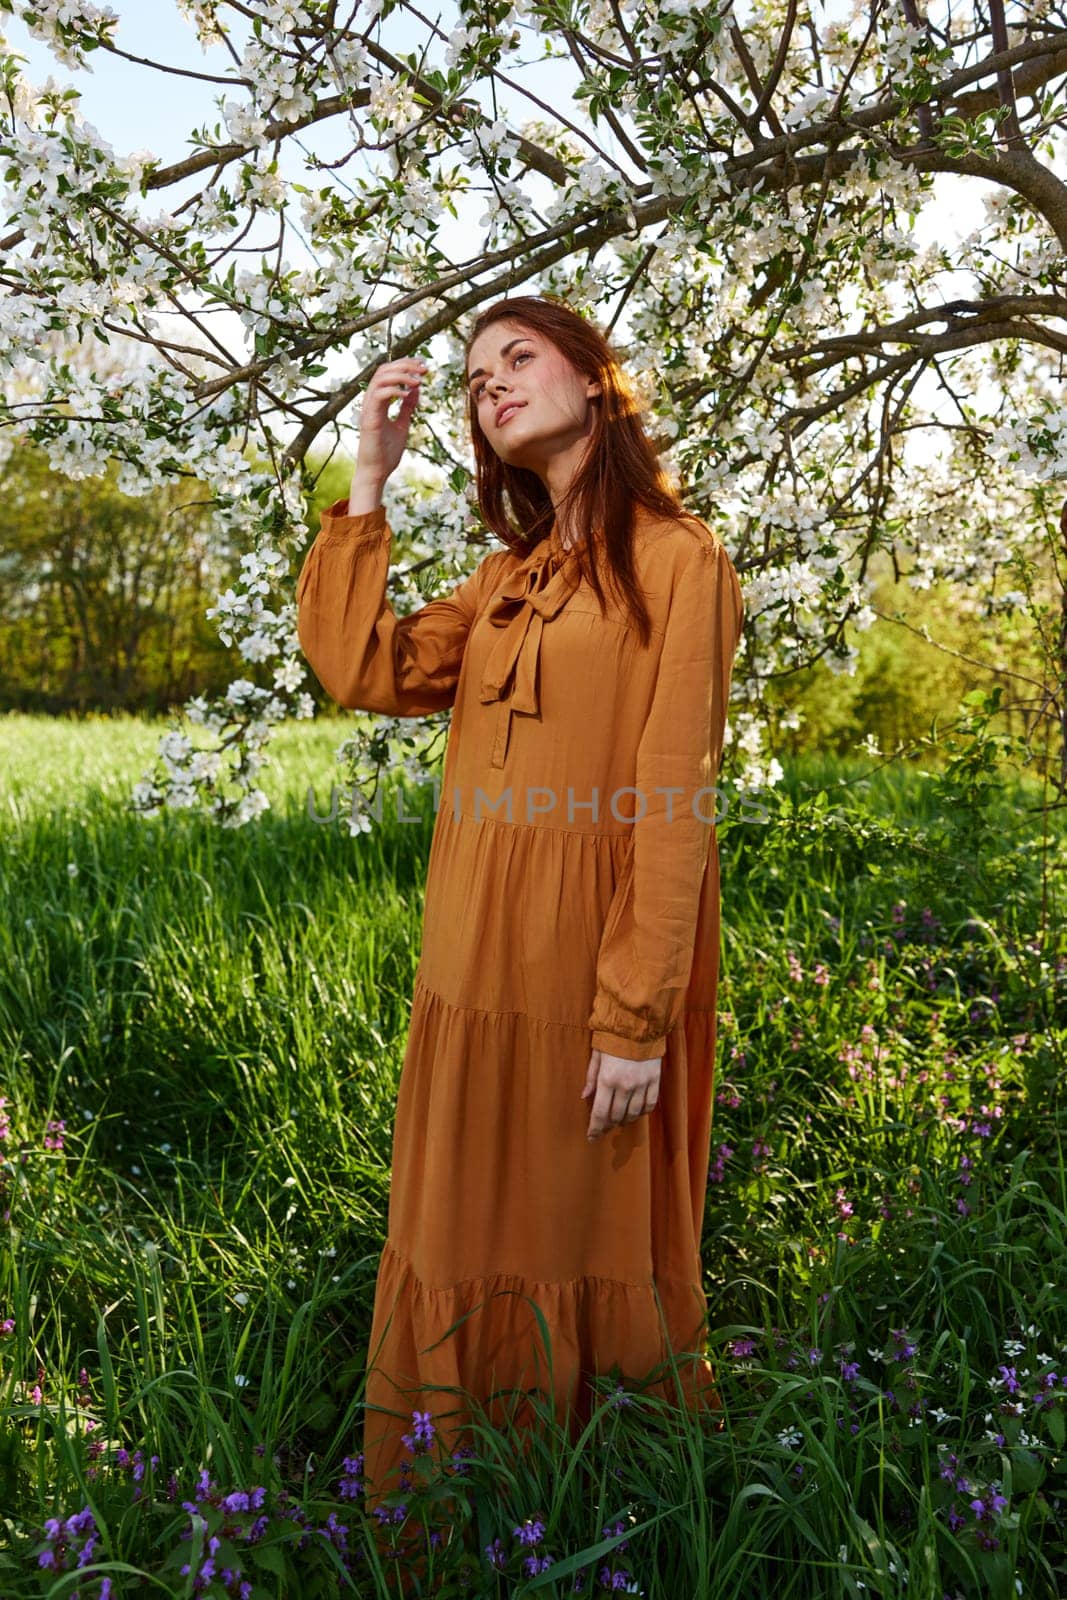 a happy, modest woman stands in an orange dress near a flowering tree and enjoys nature and a sunny summer day by Vichizh